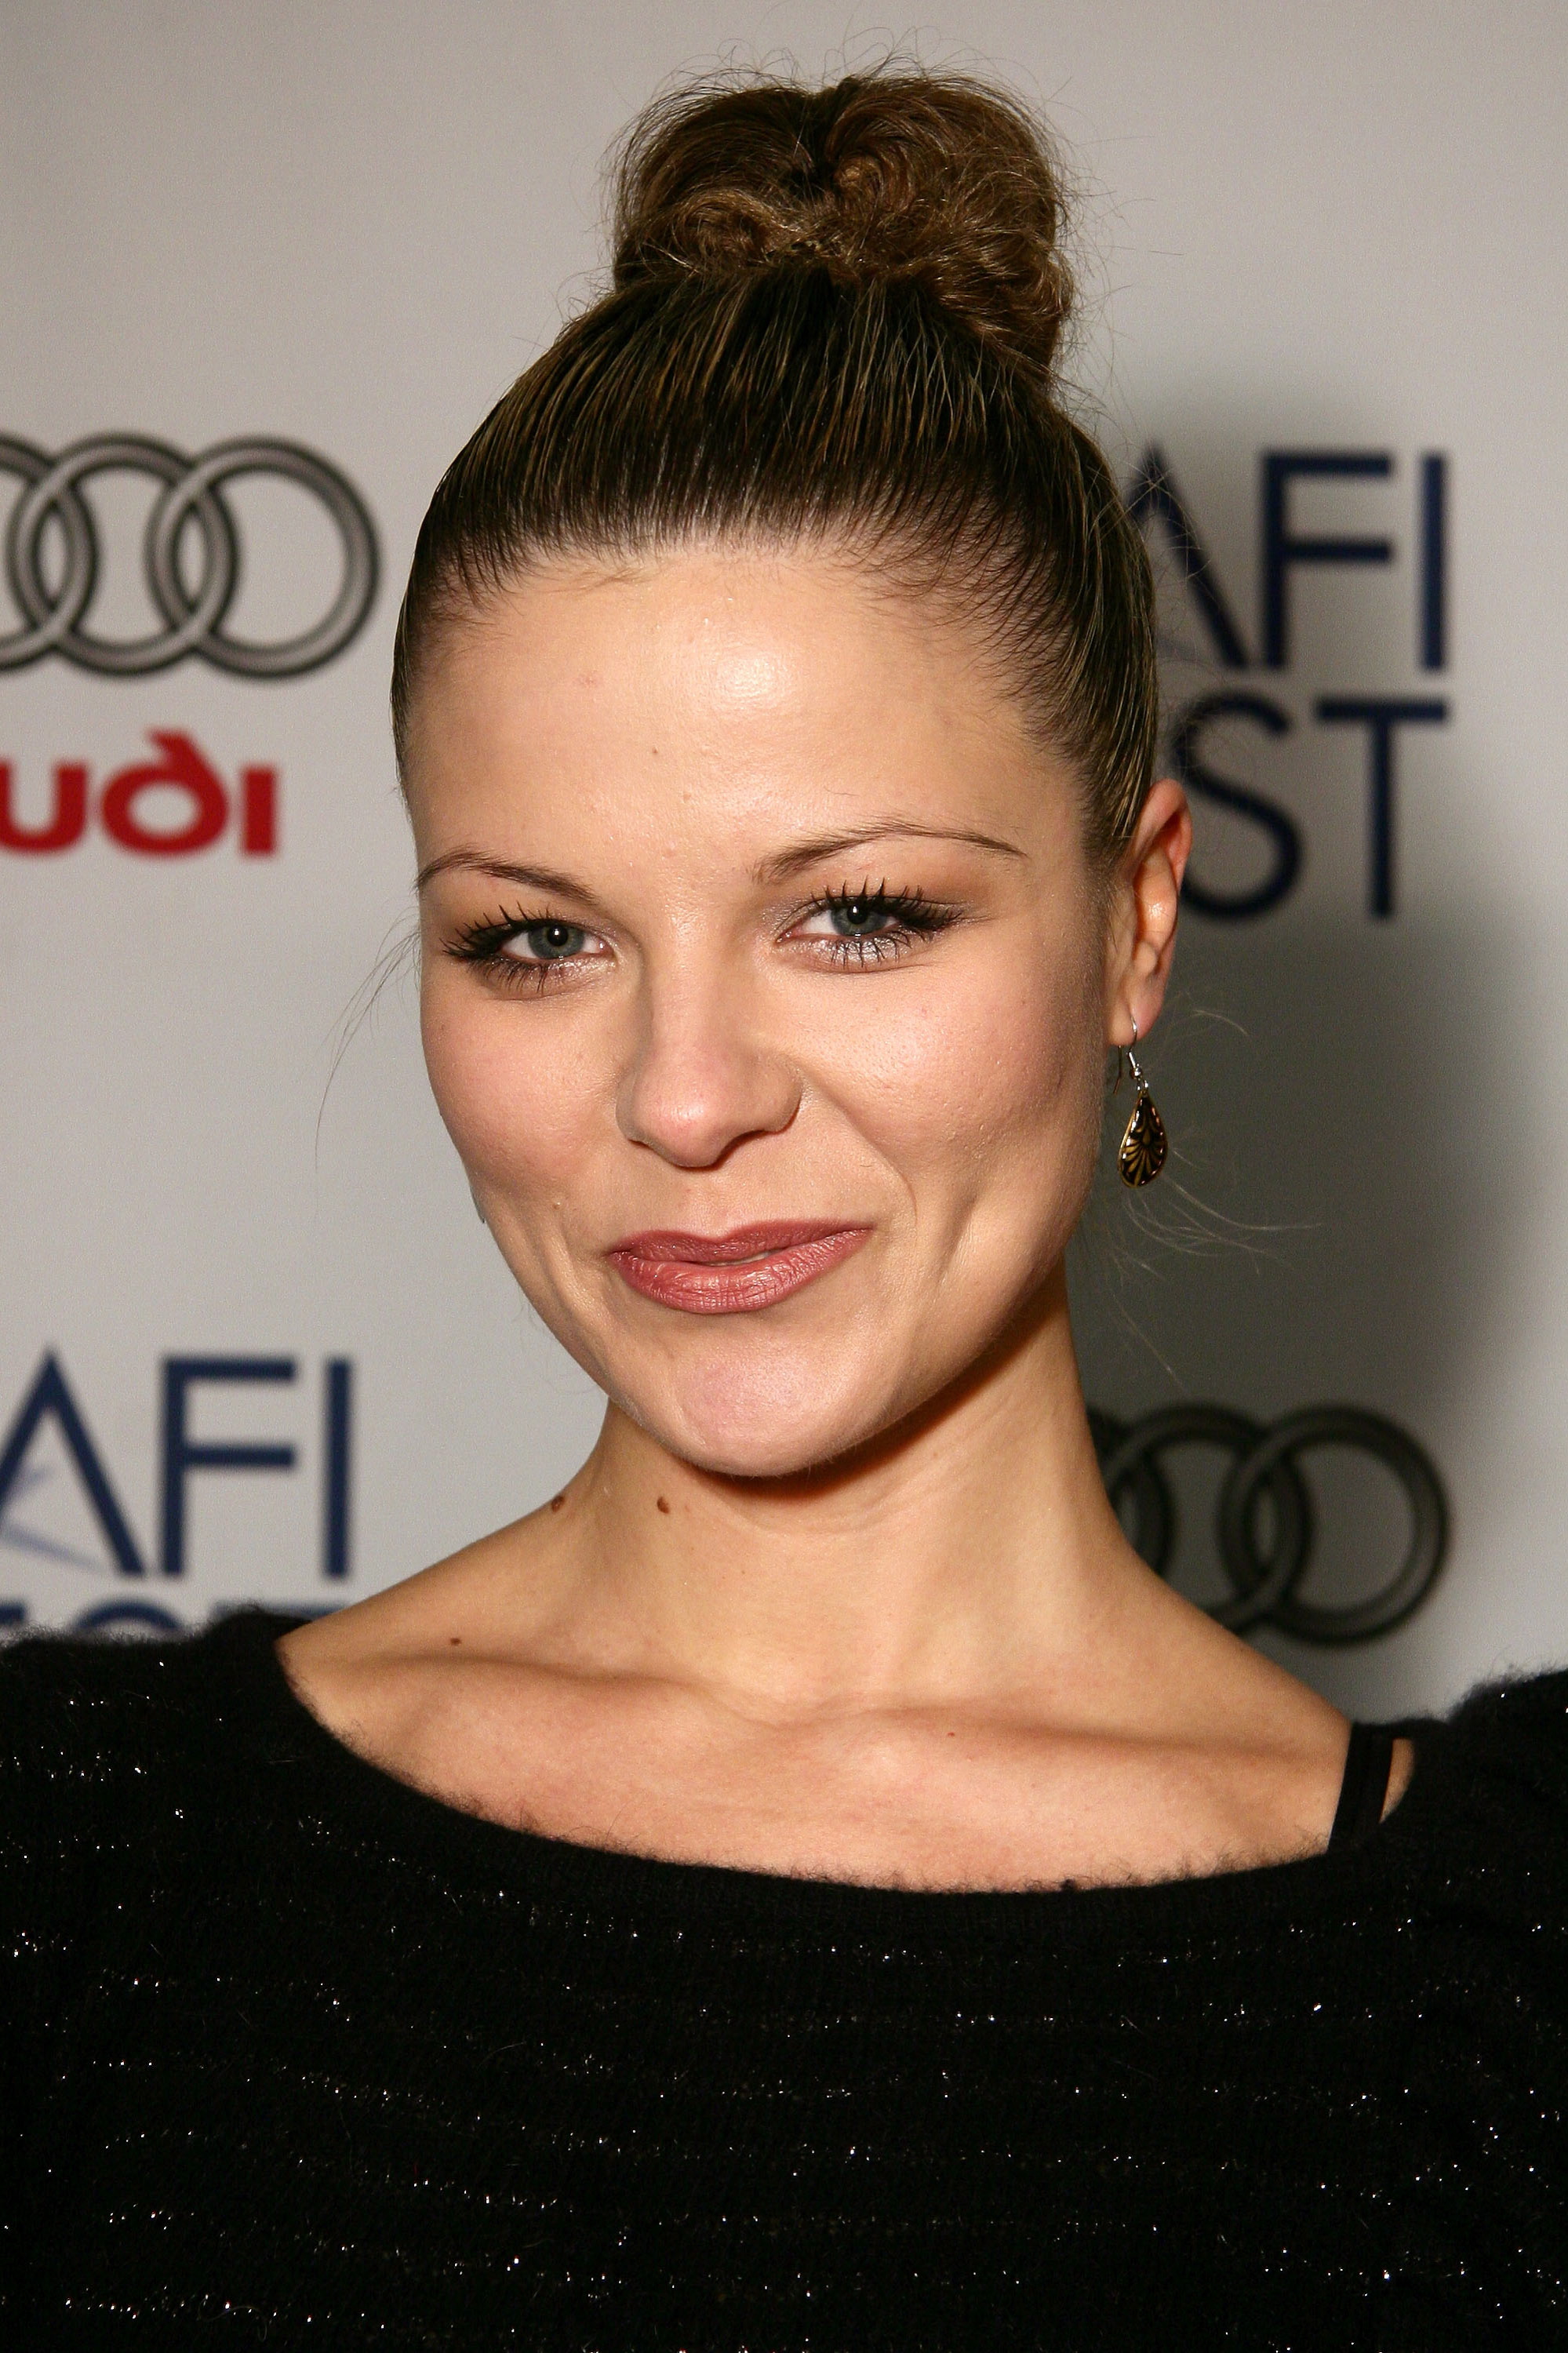 HOLLYWOOD - NOVEMBER 07: Actress Olja Hrustic attends the AFI FEST 2007 presented by Audi